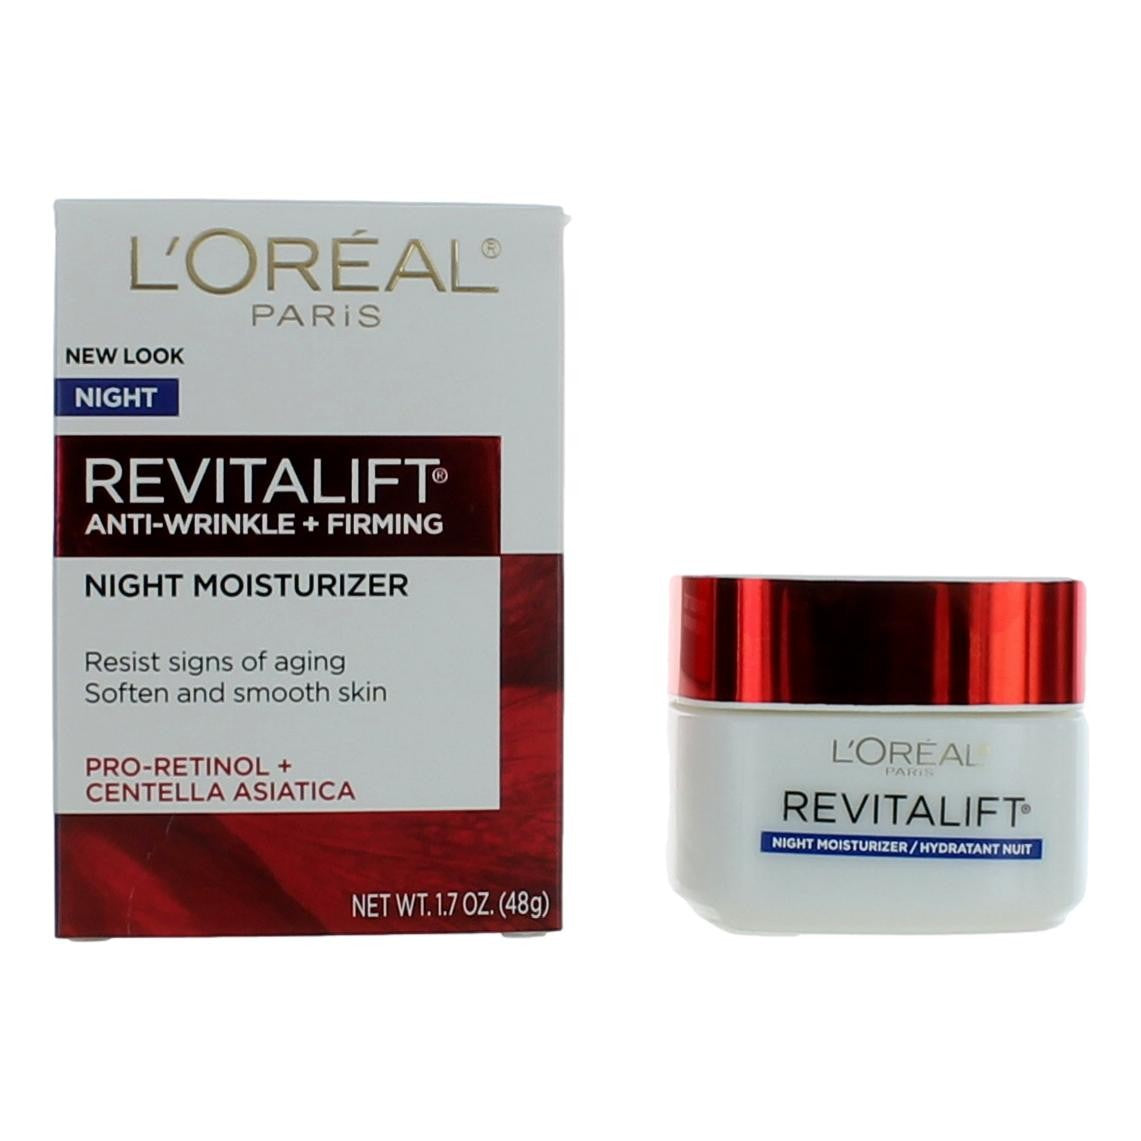 L'Oreal Revitalift Anti-Wrinkle + Firming by L'Oreal, 1.7oz Night Moisturizer